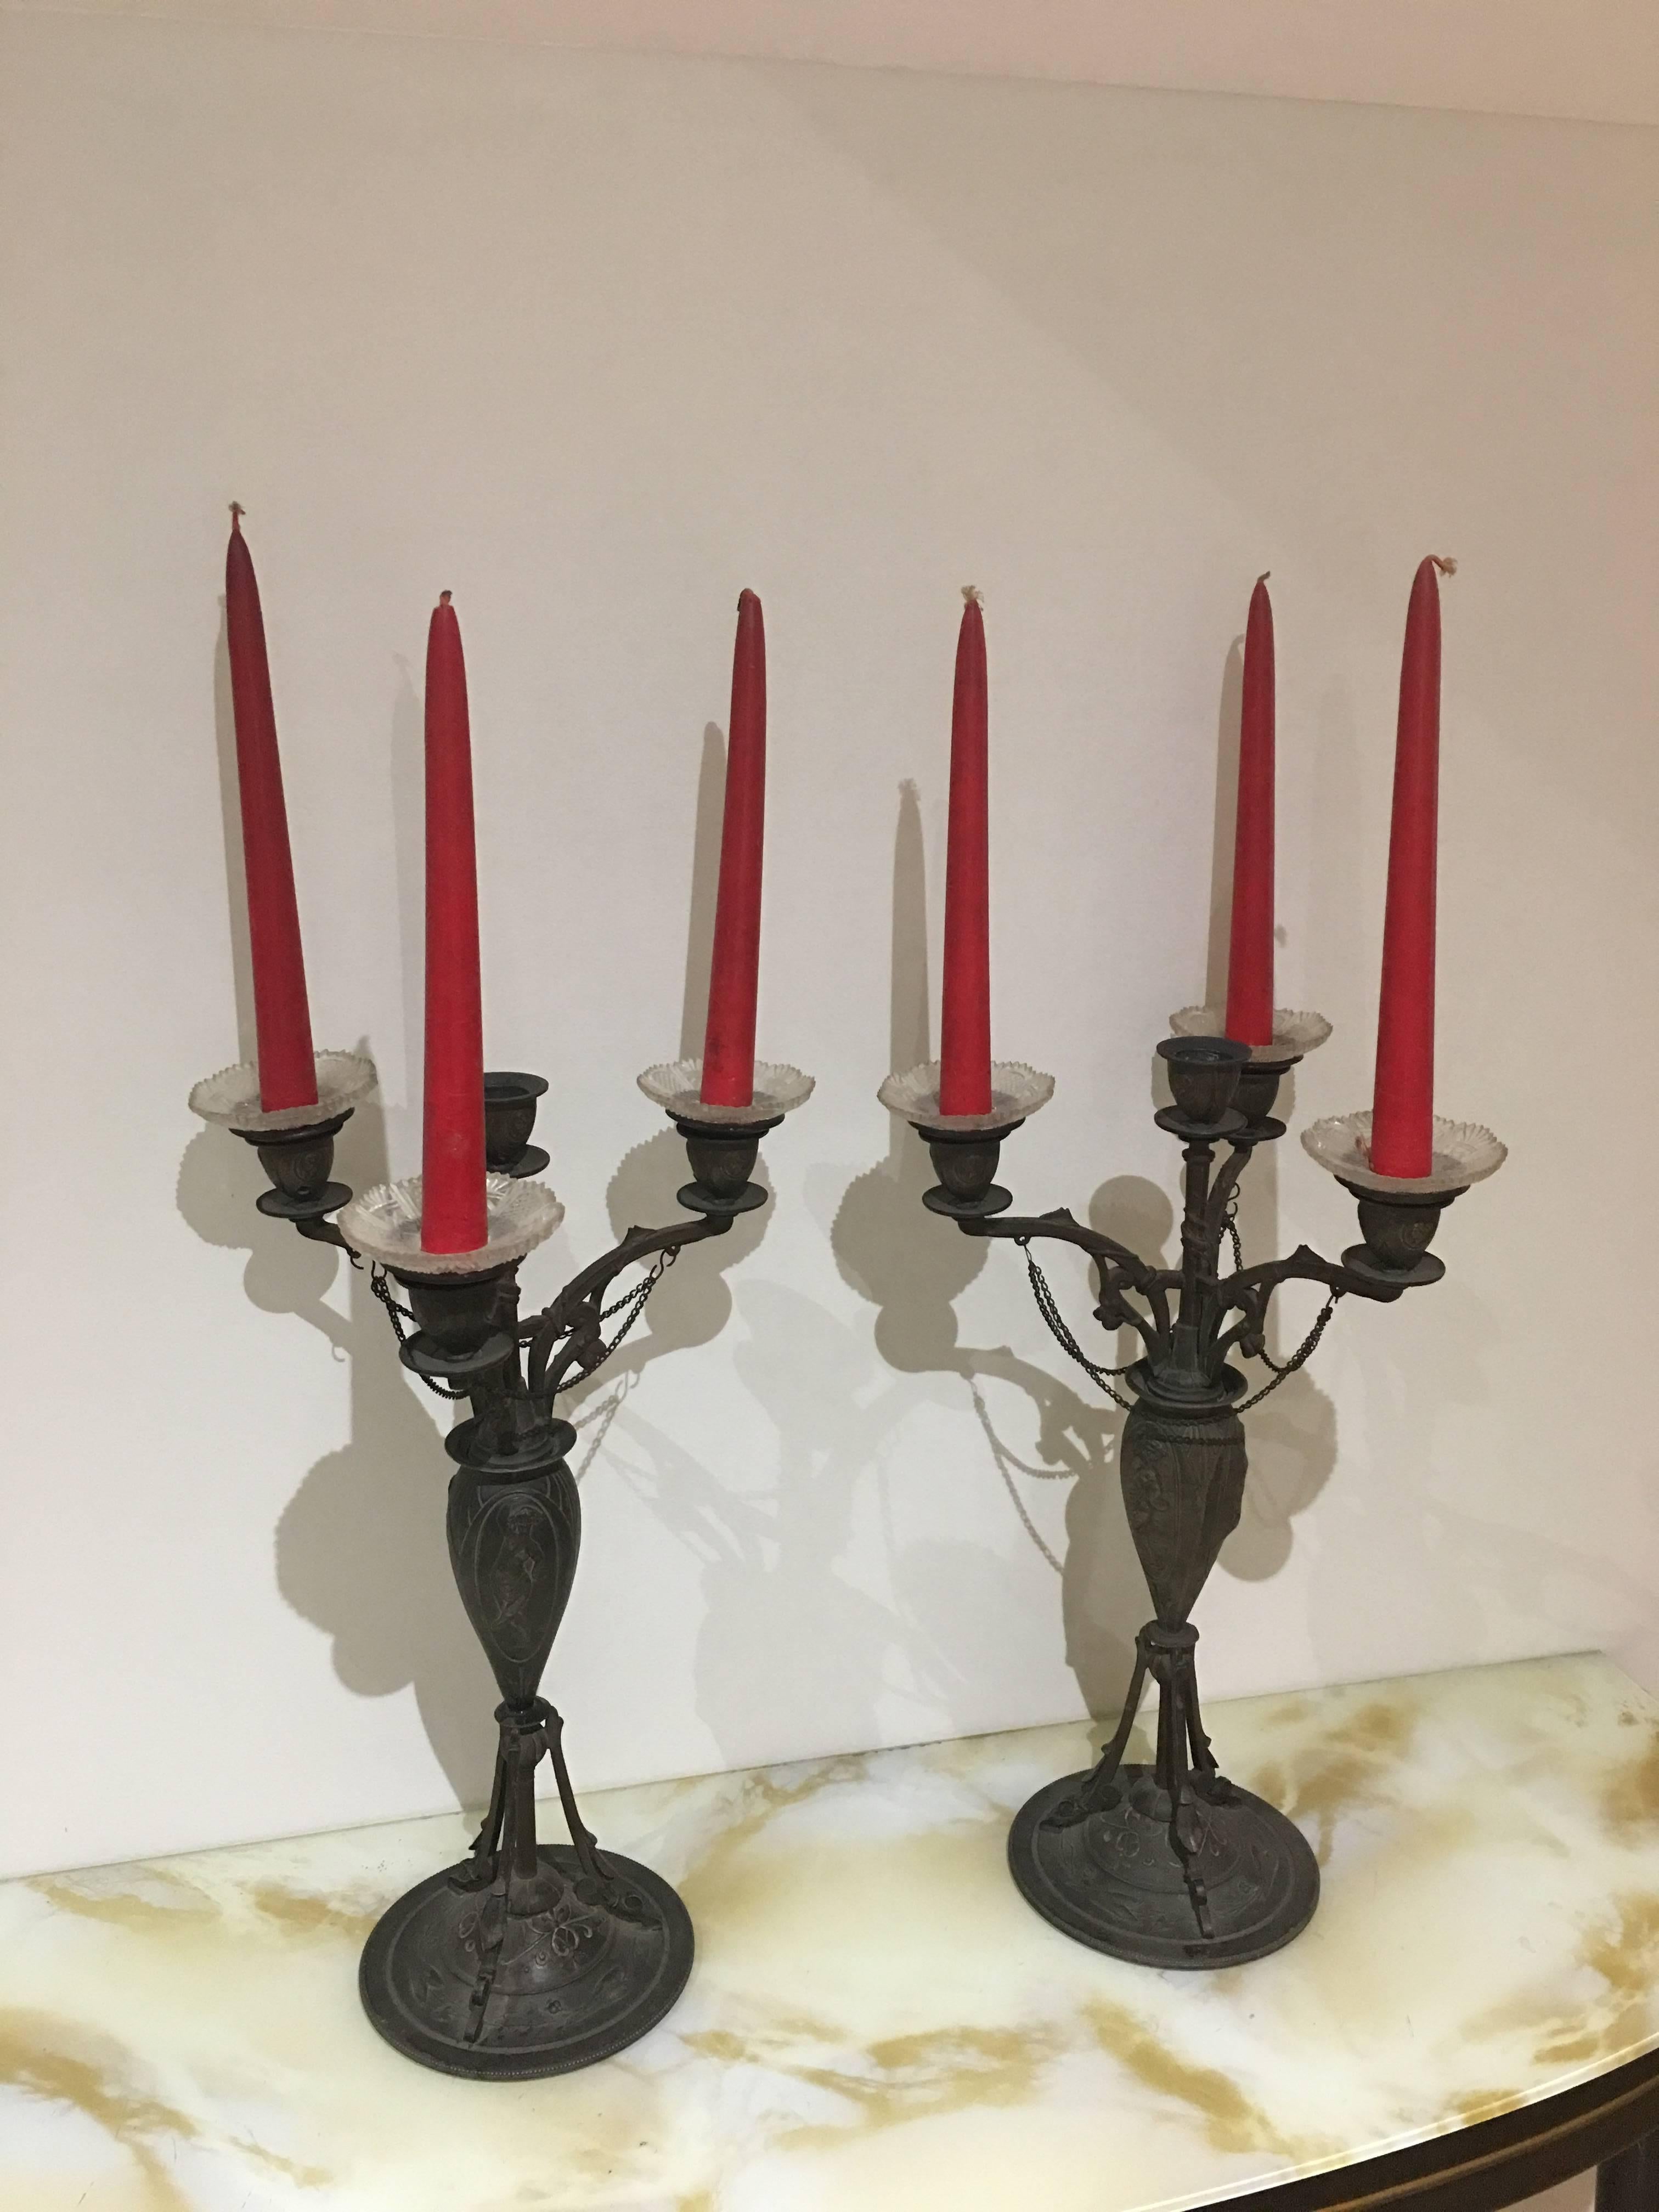 Unique Italian Art Nouveau two candlestick holders / candelabra
Marked 80 AB.

INTERNATIONAL SHIPPING
Our transportation of antique furniture and items is executed with utmost care and with personal flavour in order pick up or bring your precious